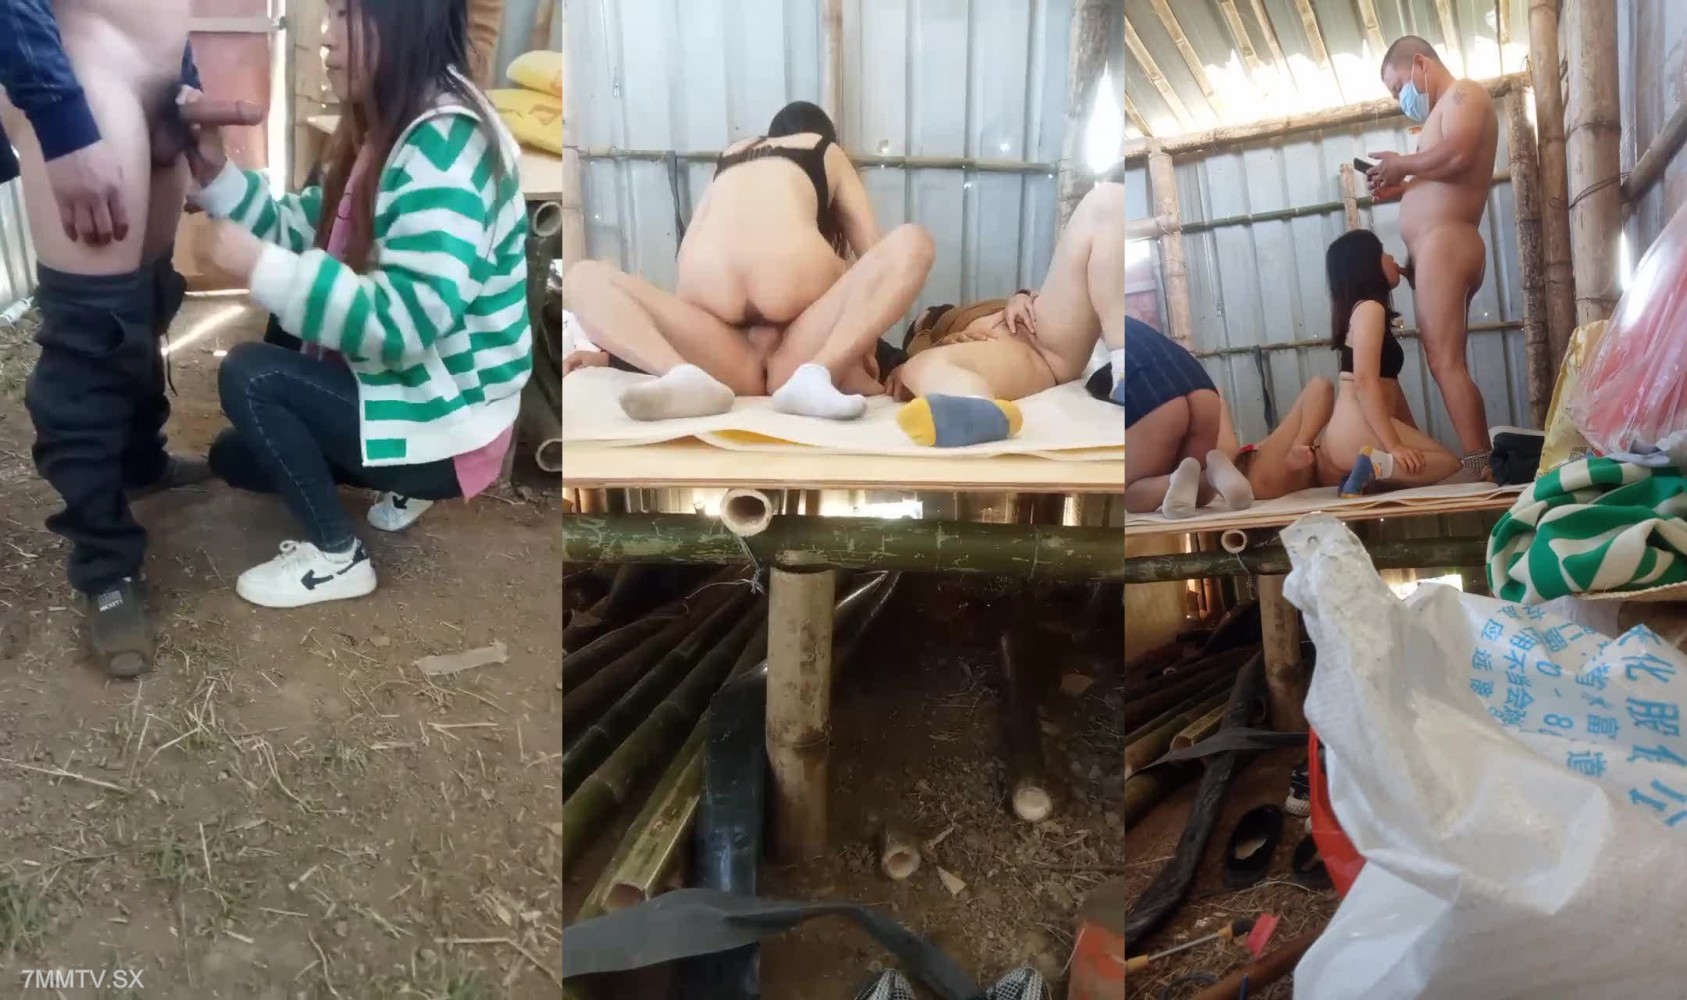 Rural 4P Wife-swapping Games Hook Up With Passionate Sex, Show Live In A Simple Shed, Blowjob With Big Dick Before Taking Off Clothes - 7mmtv.sx